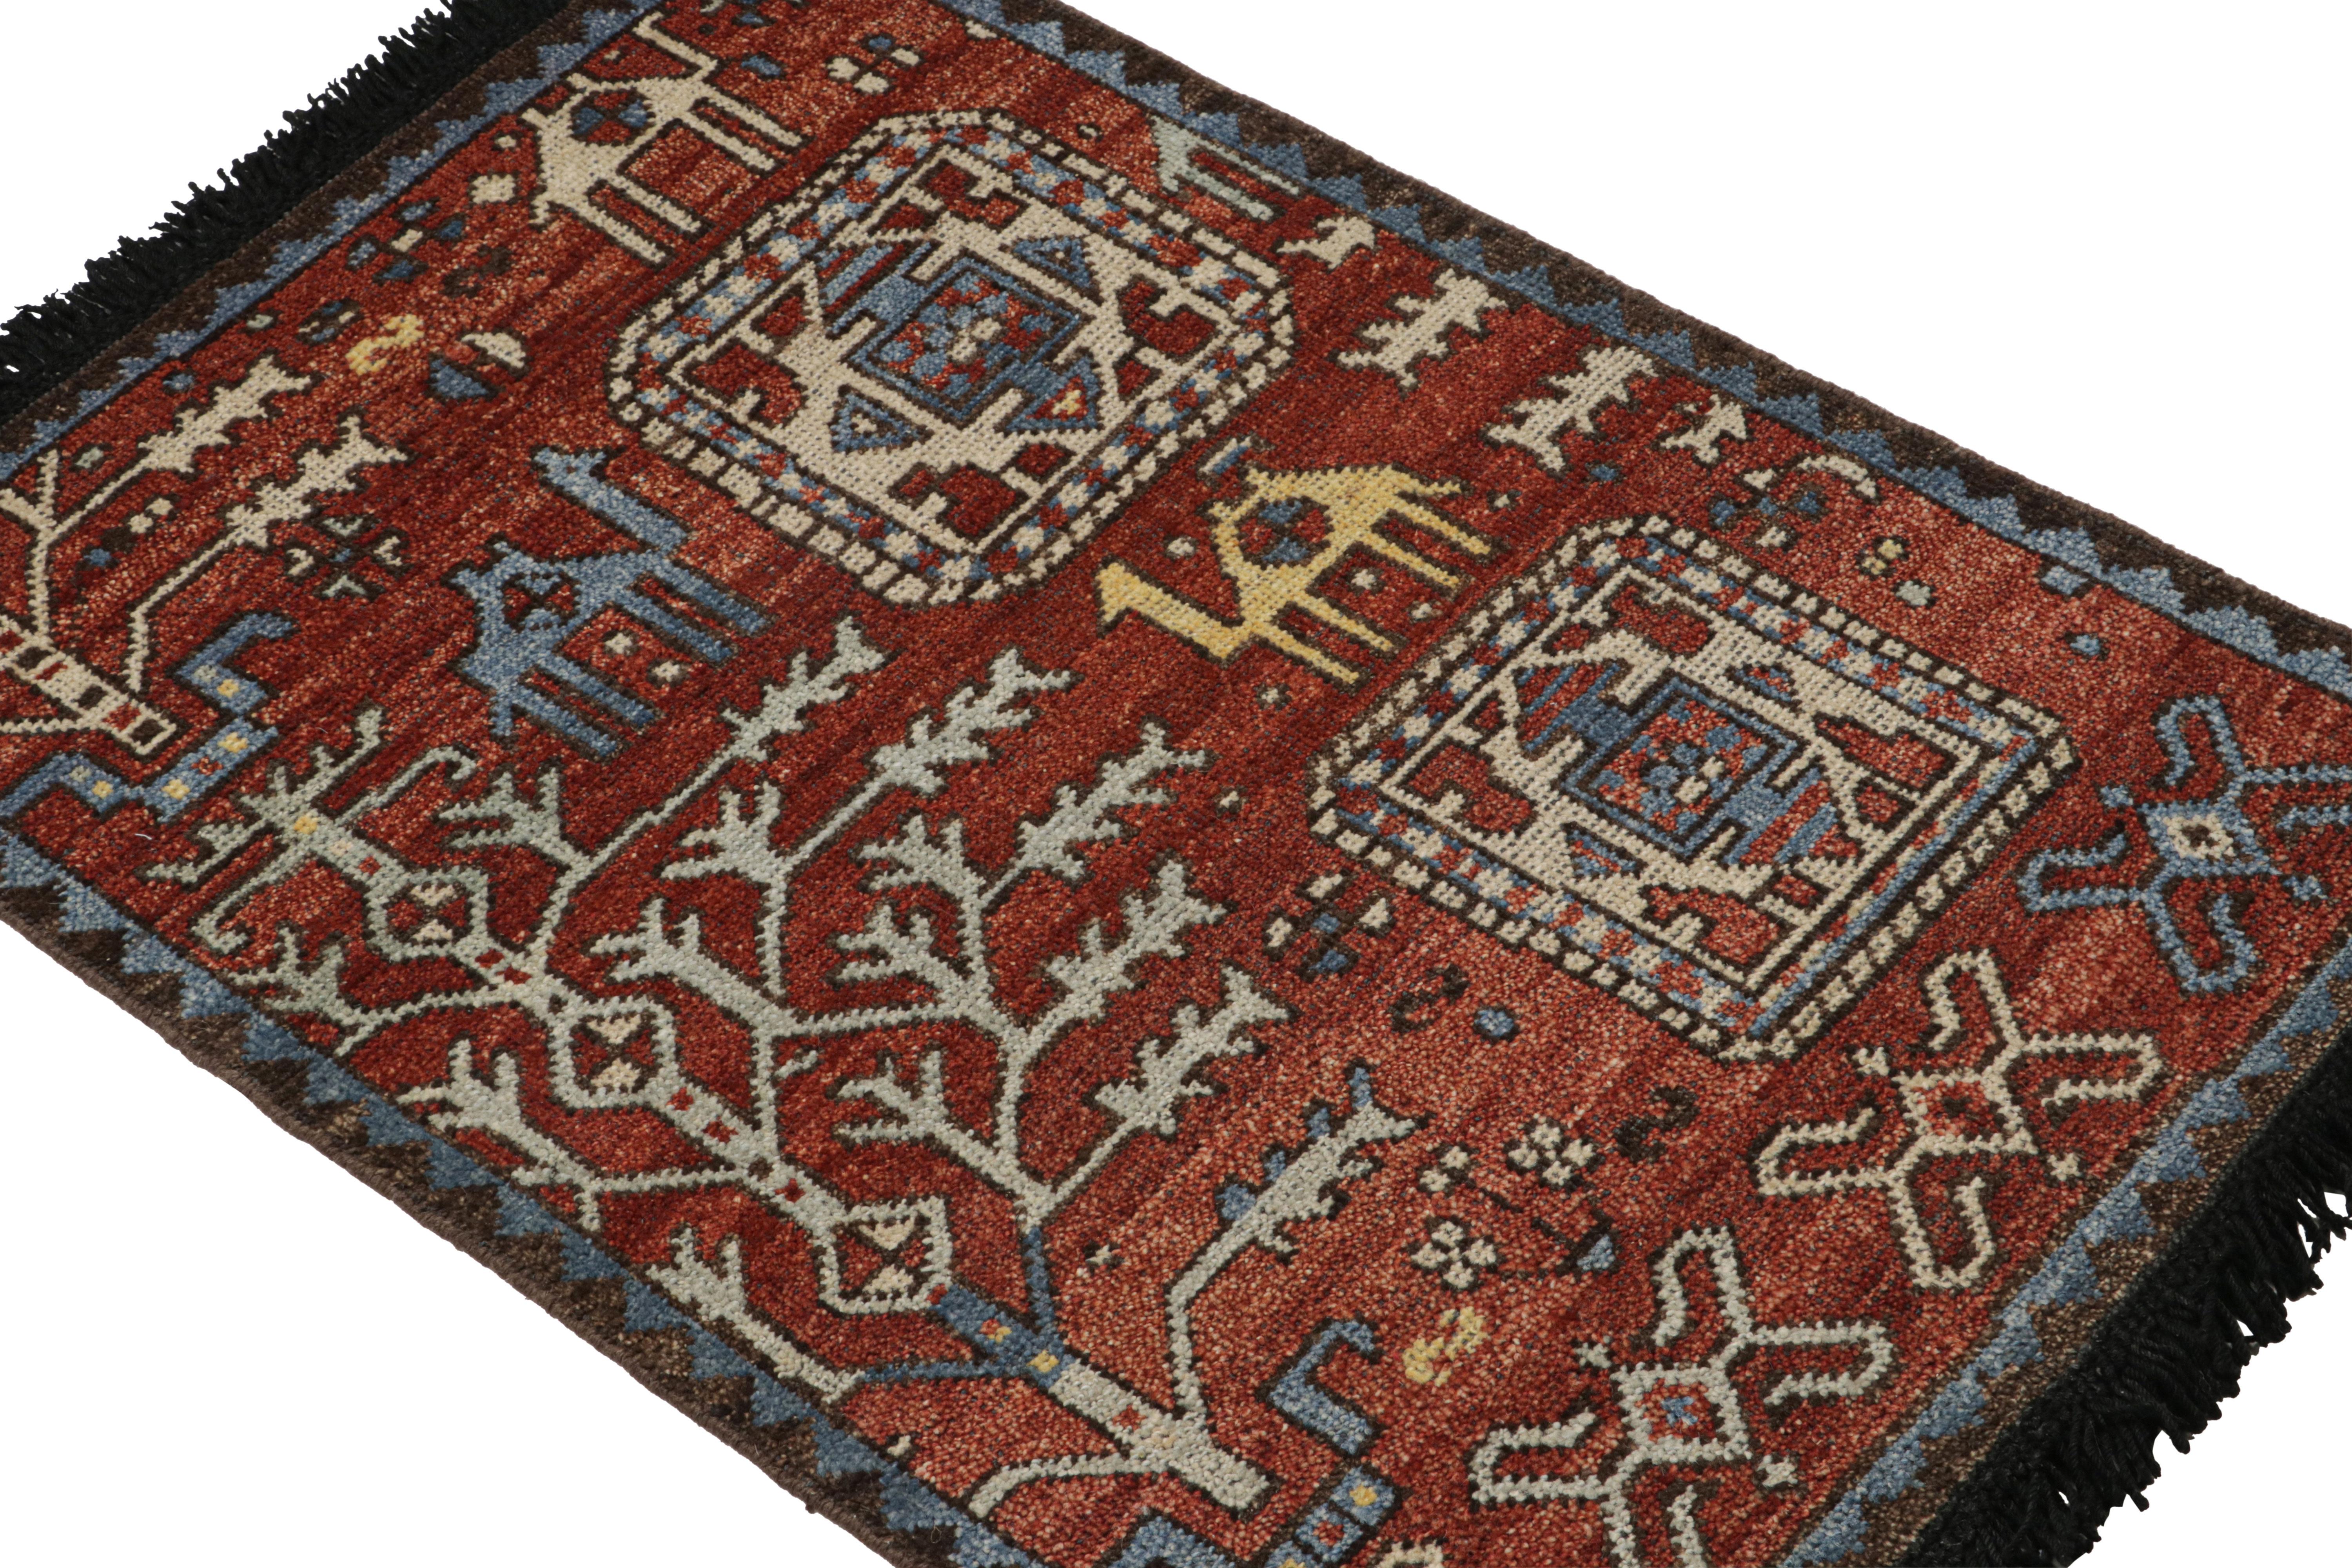 As Inspired by tribal and Caucasian pictorial rugs with a particular love of camels, this 2x3 modern architectural rug from our Burano collection is hand-knotted in wool. 

On the Design: 

Connoisseurs will admire that this design has been inspired